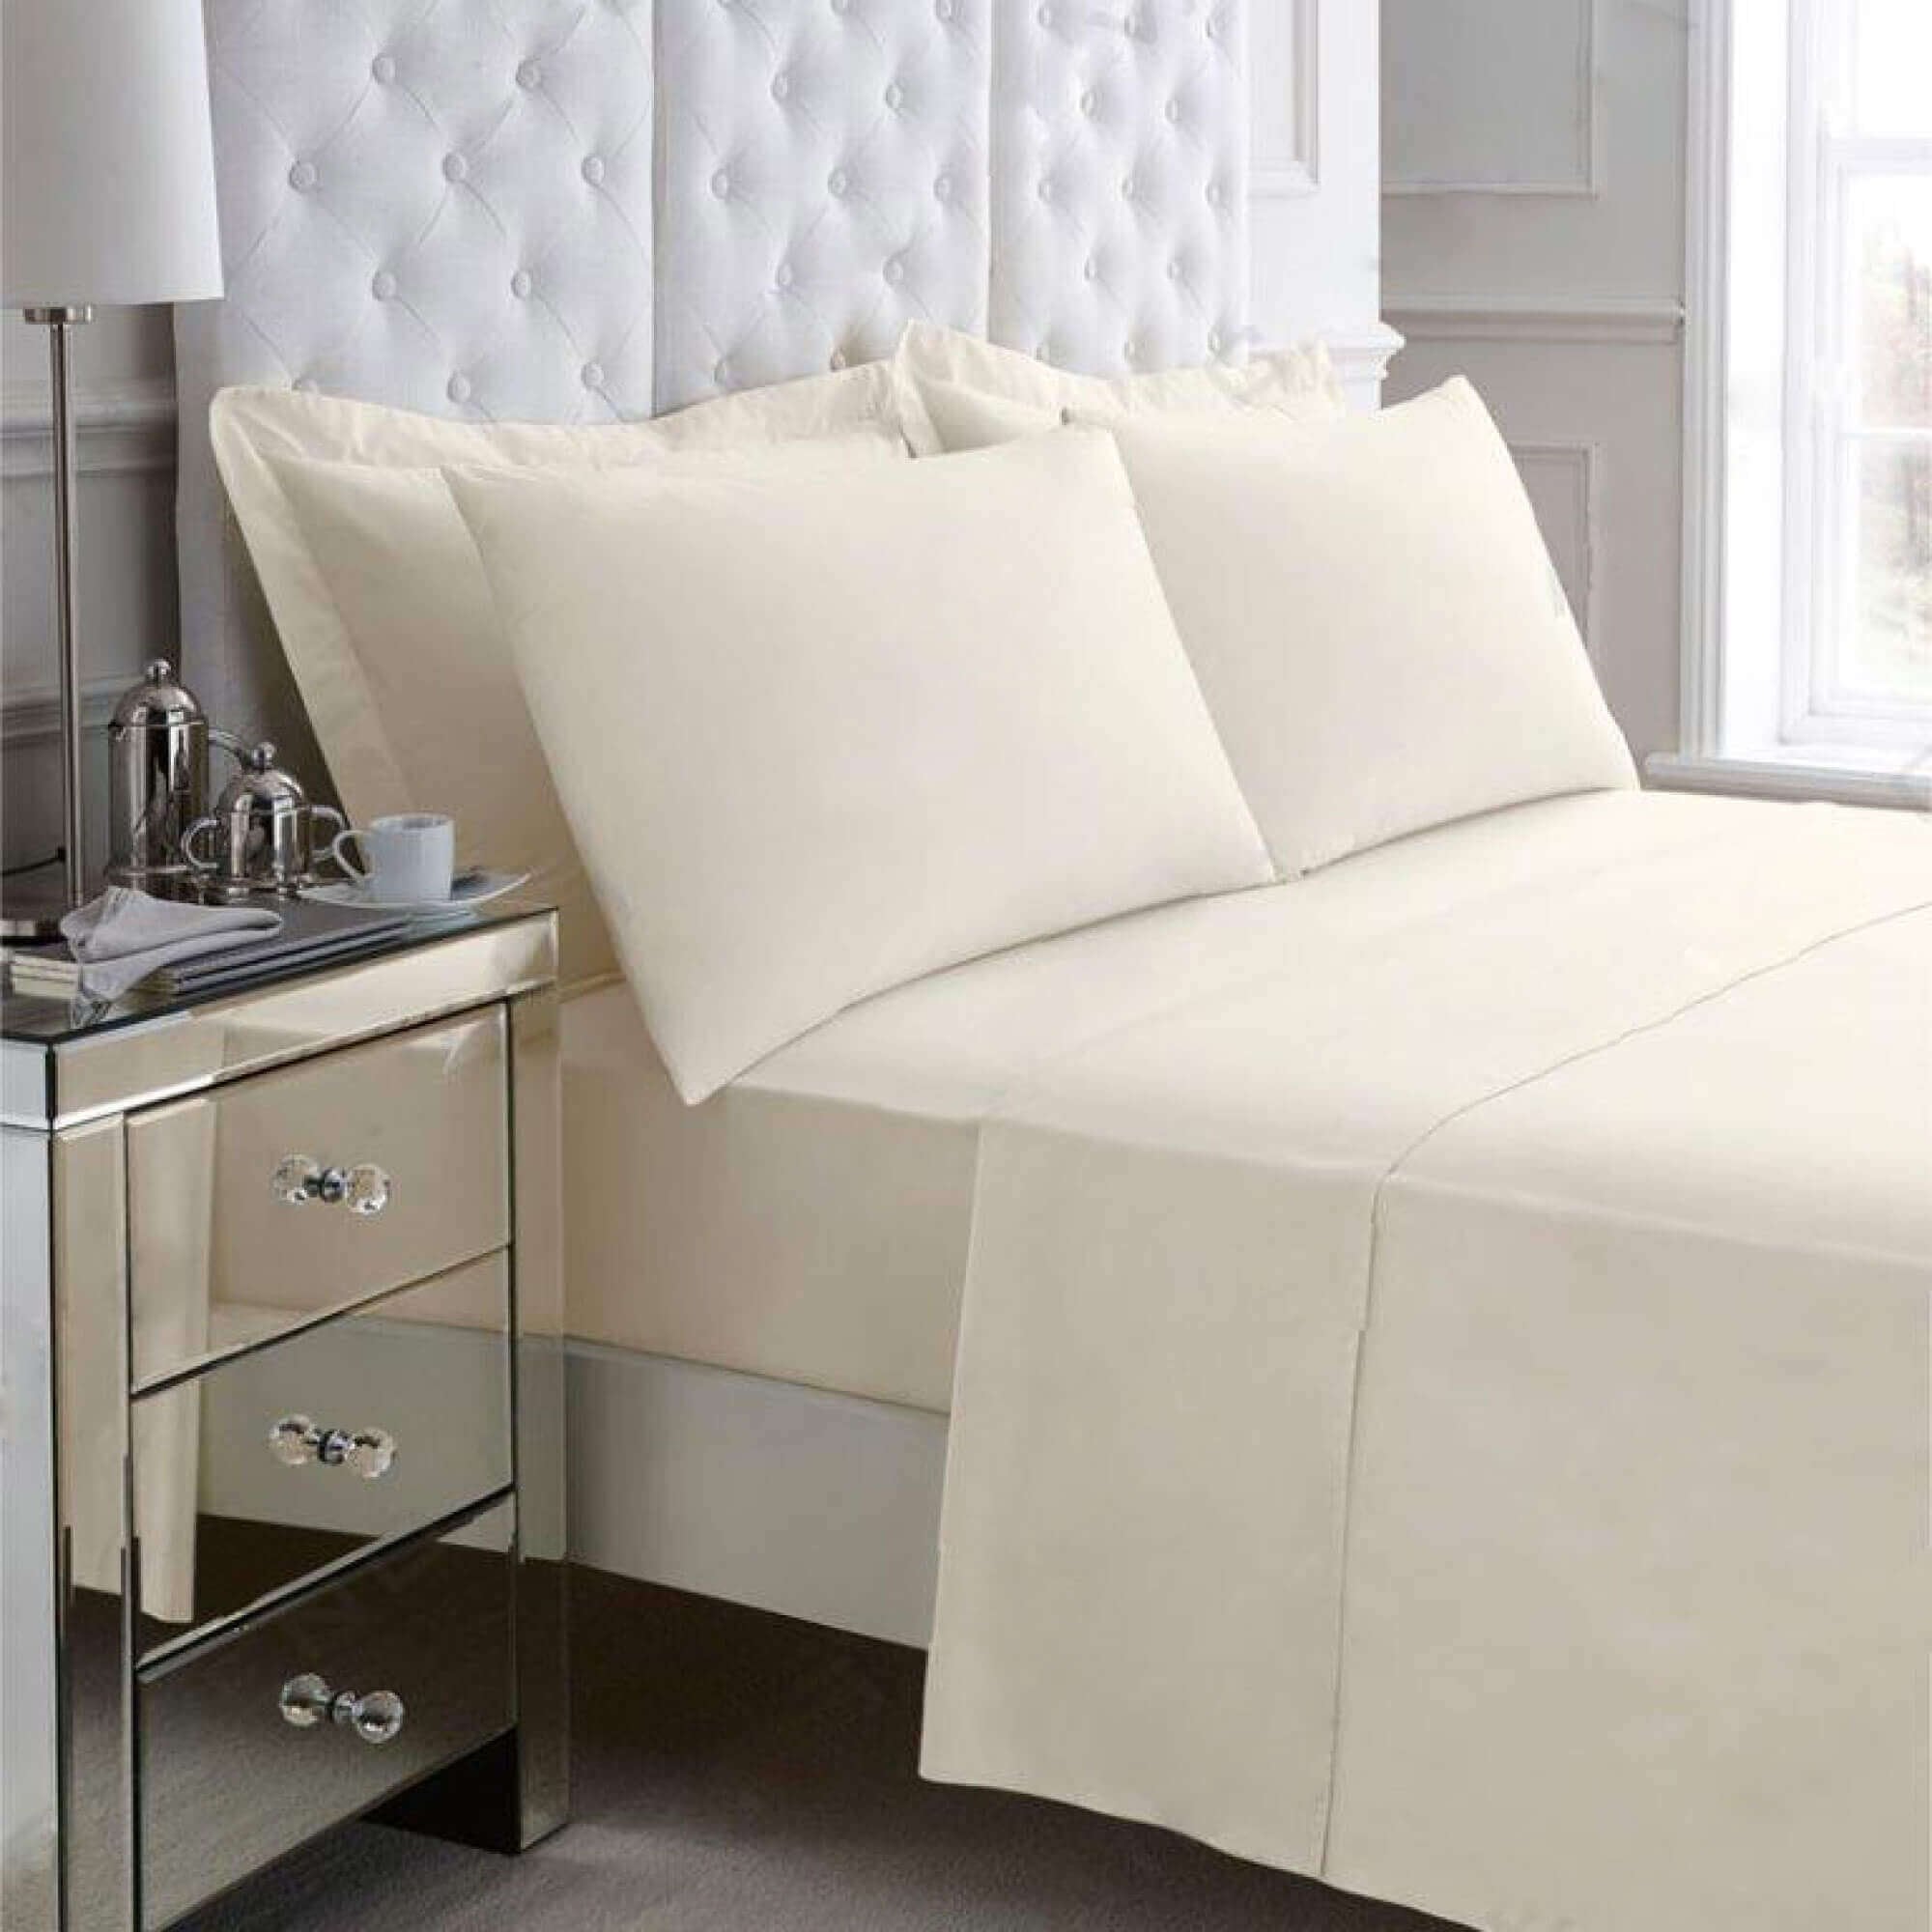 Non Iron Percale Bedding Sheet Range - Cream - Double FItted Valance - TJ Hughes